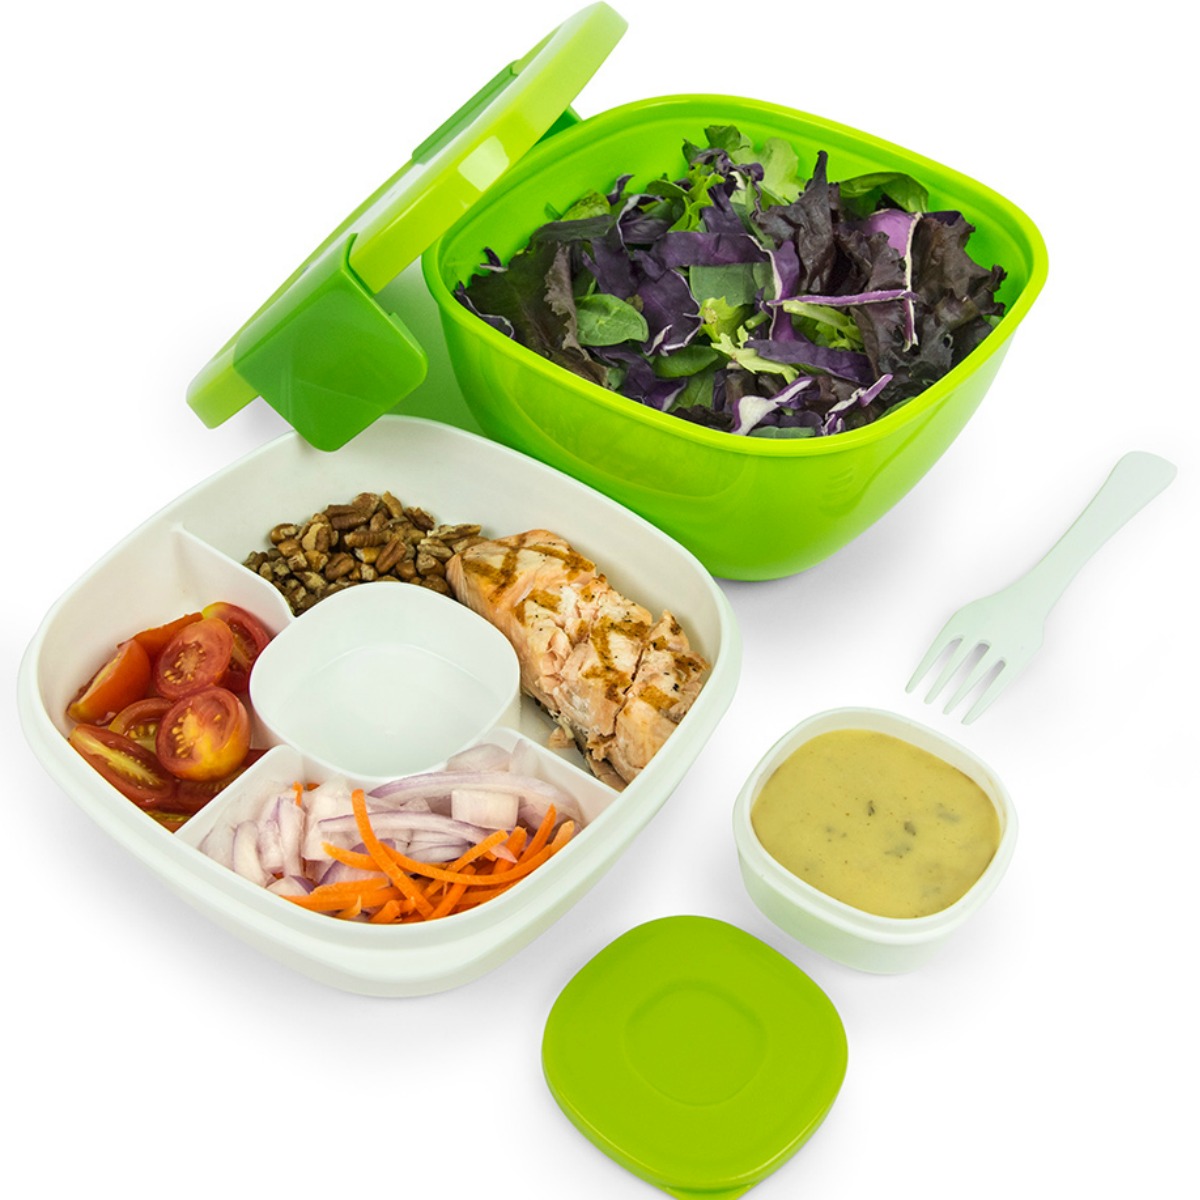 Salad container with mixed greens, fork, and grilled chicken.